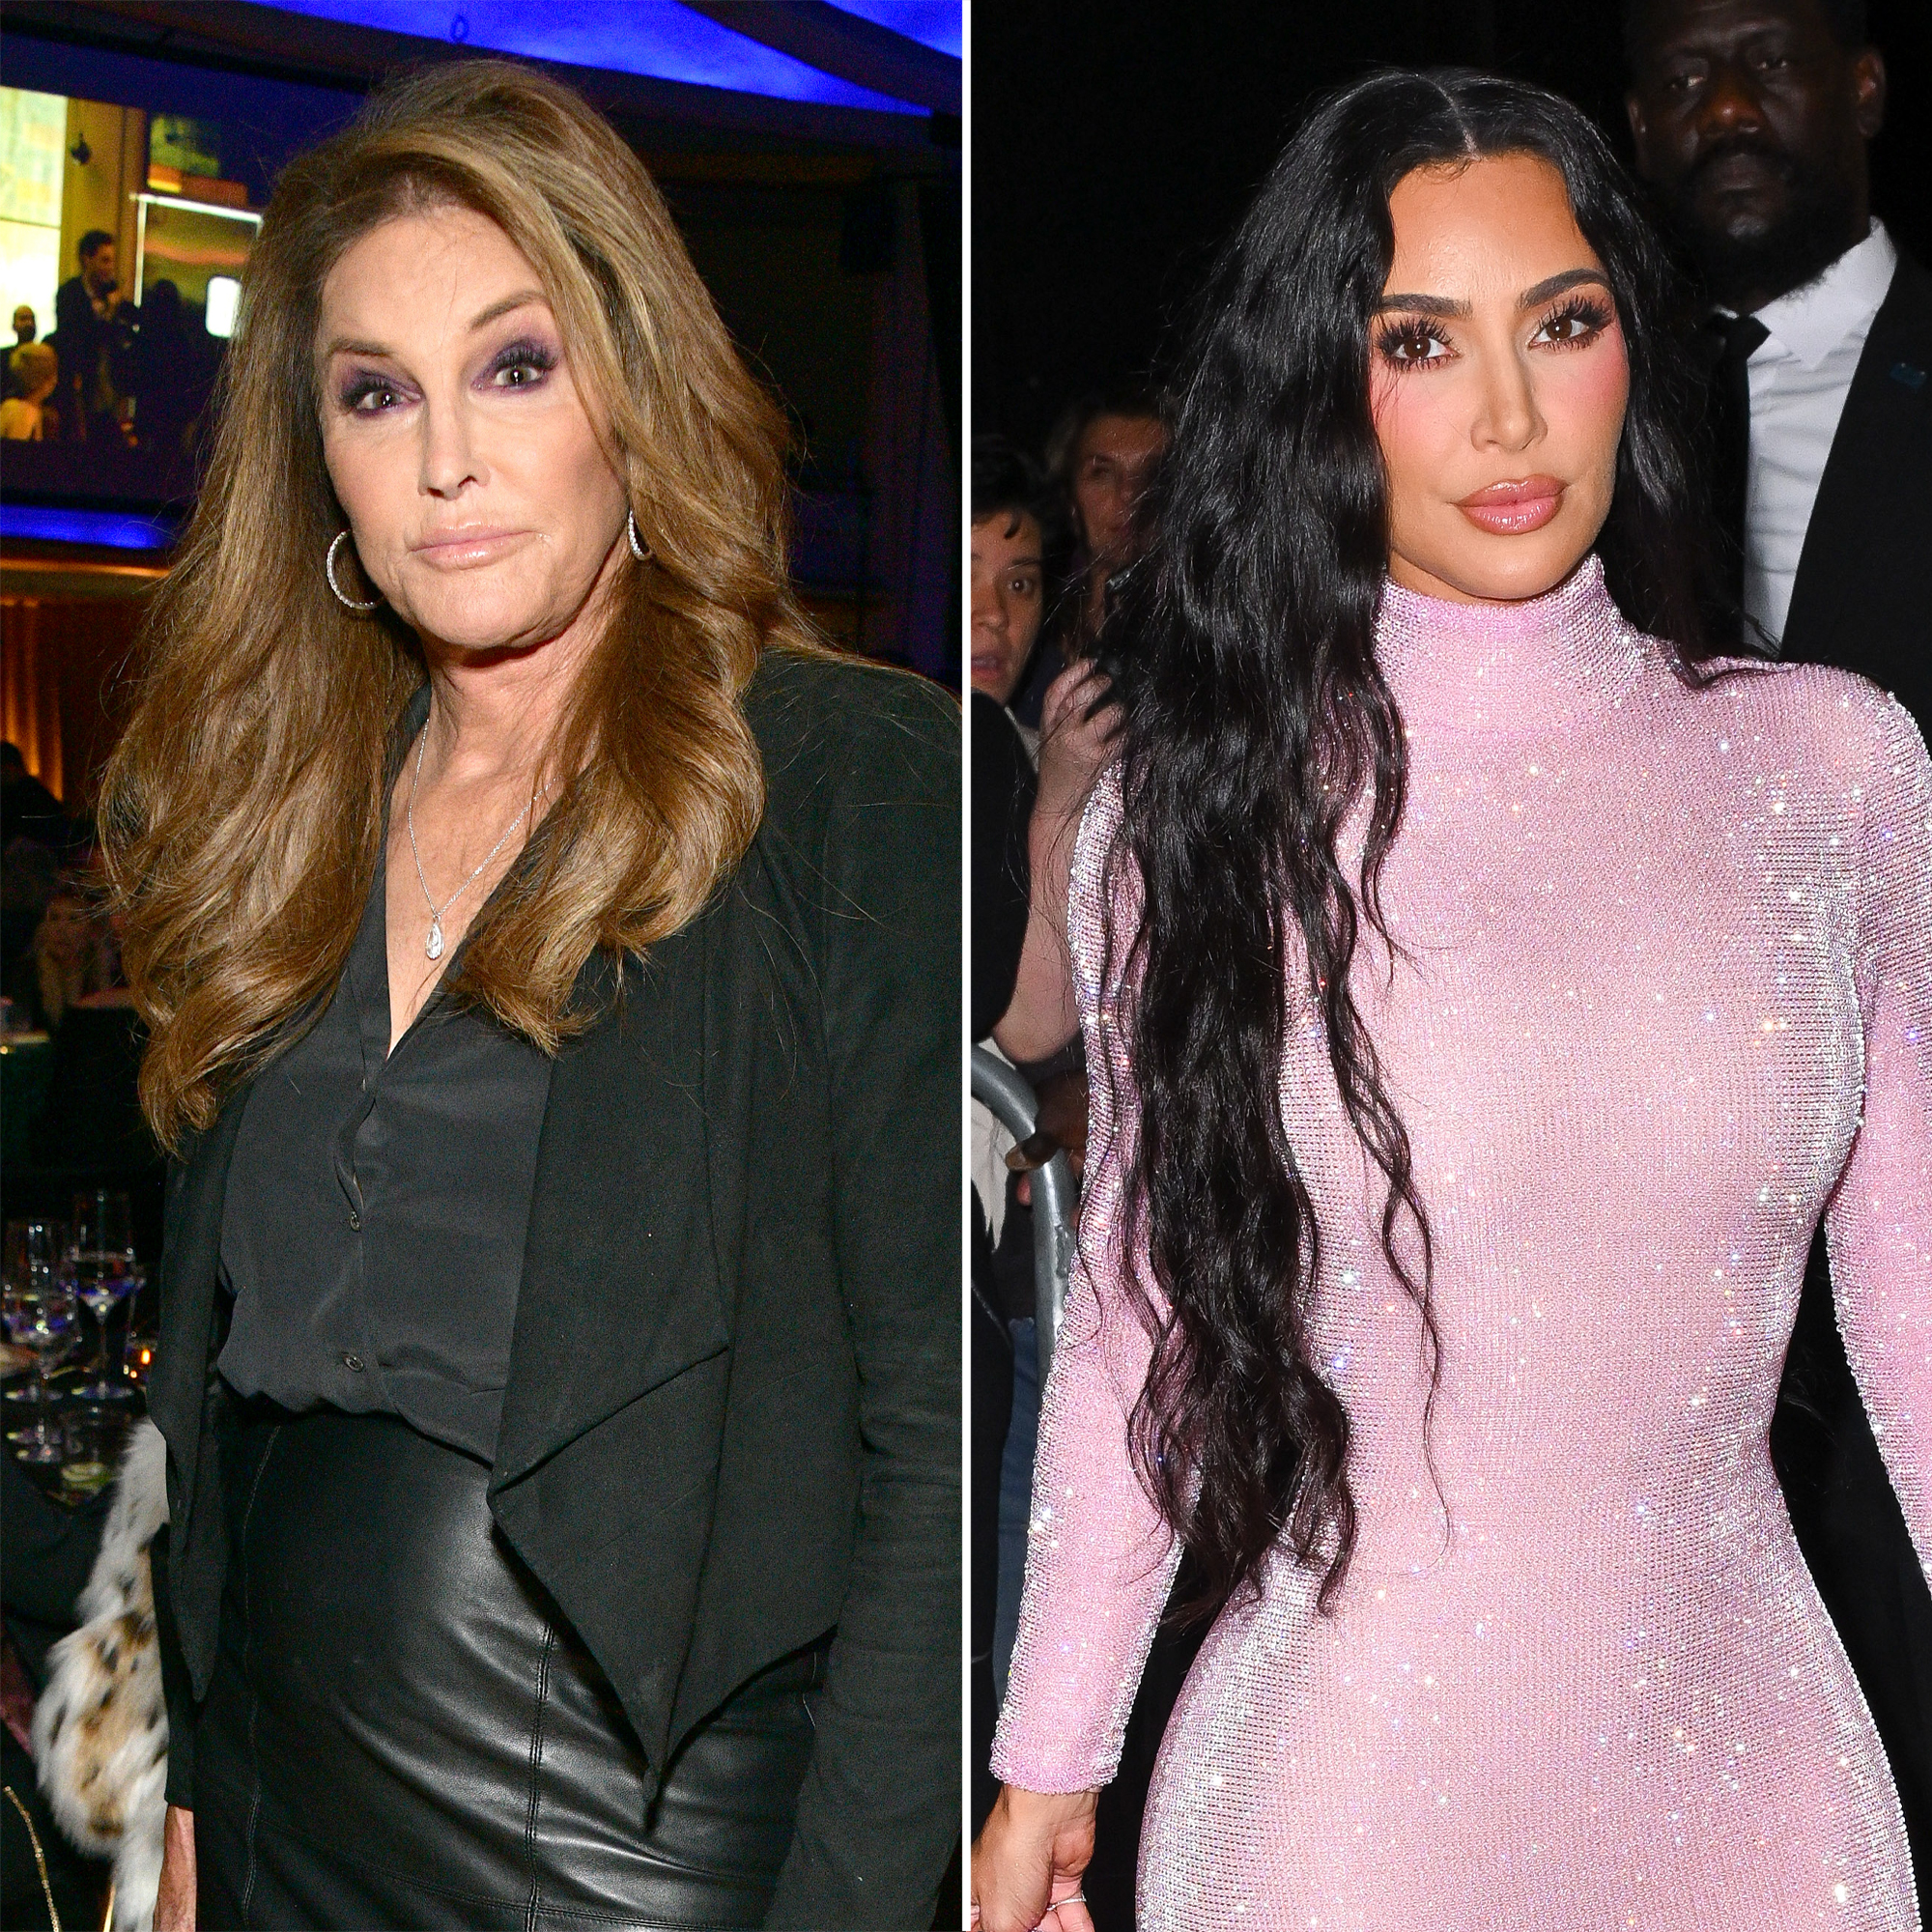 Caitlyn Jenner Reacts to Kim Kardashian's Comment About Her | Us Weekly